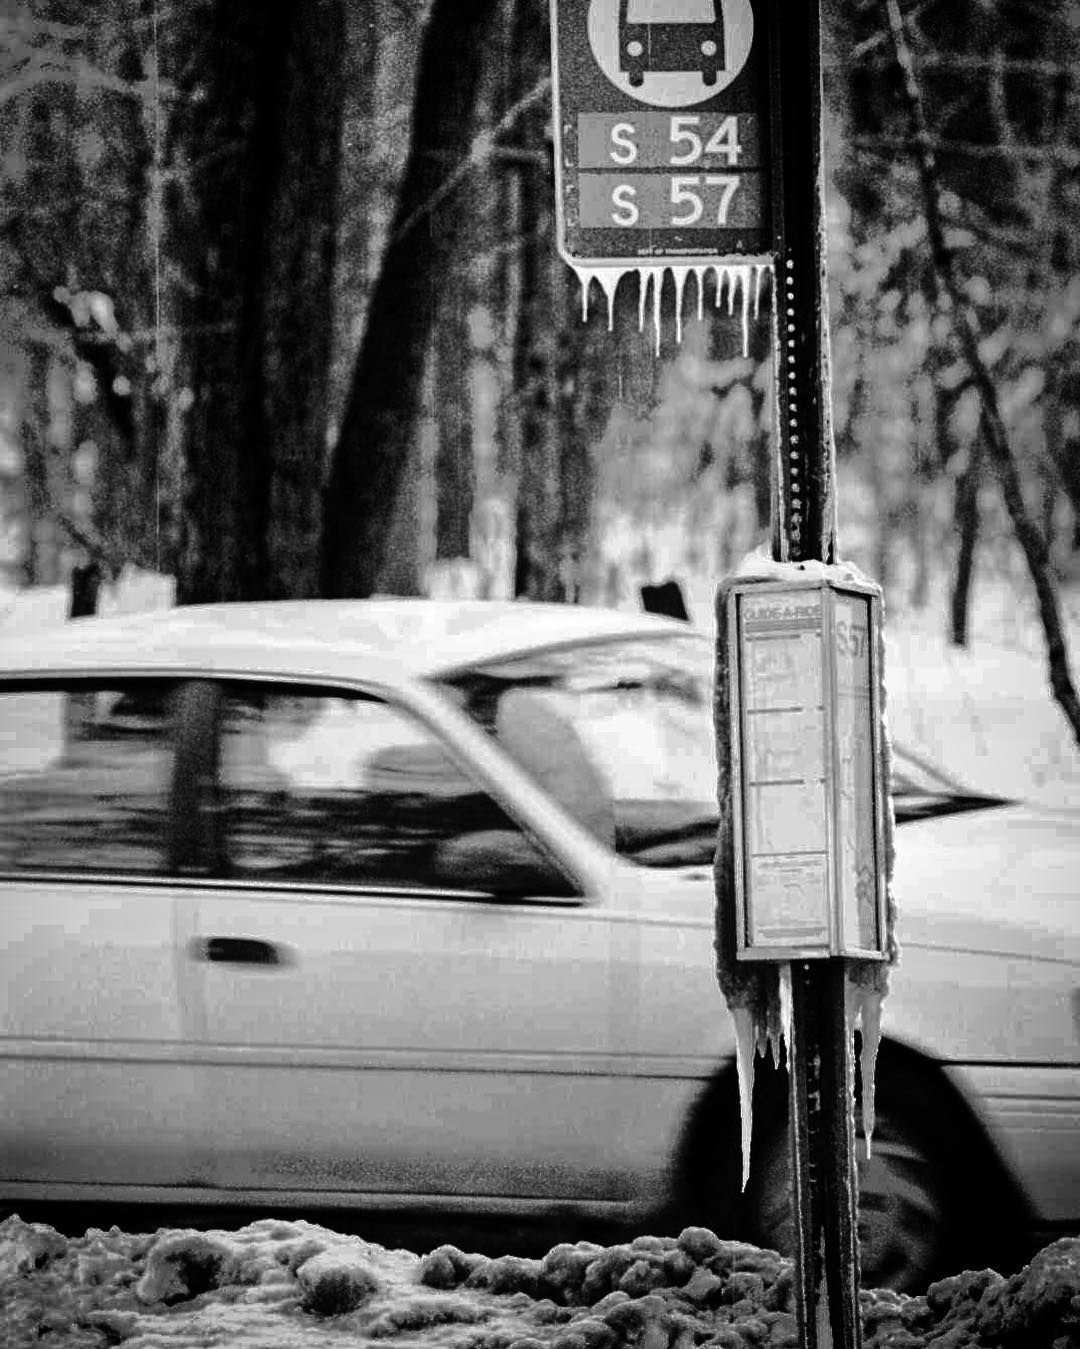 An Ice-Covered Bus Stop In Egbertville On A Day With Wind Chills Ranging From -10 To -20 Degrees, 1996.